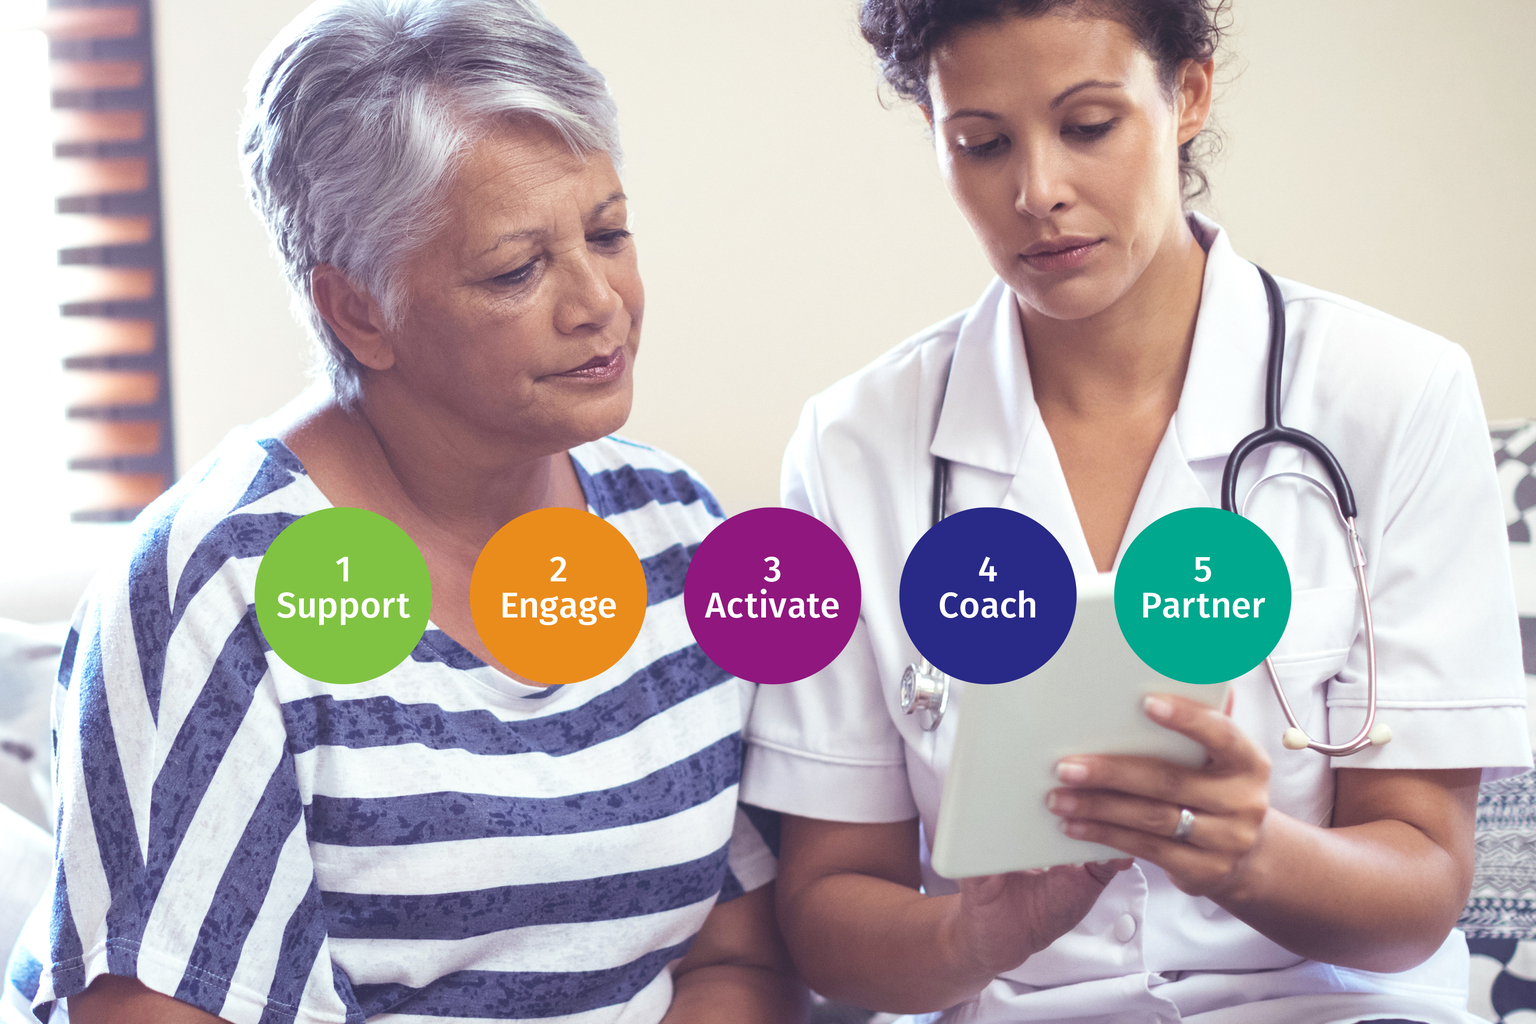 Key takeaways from the patient partnership maturity model